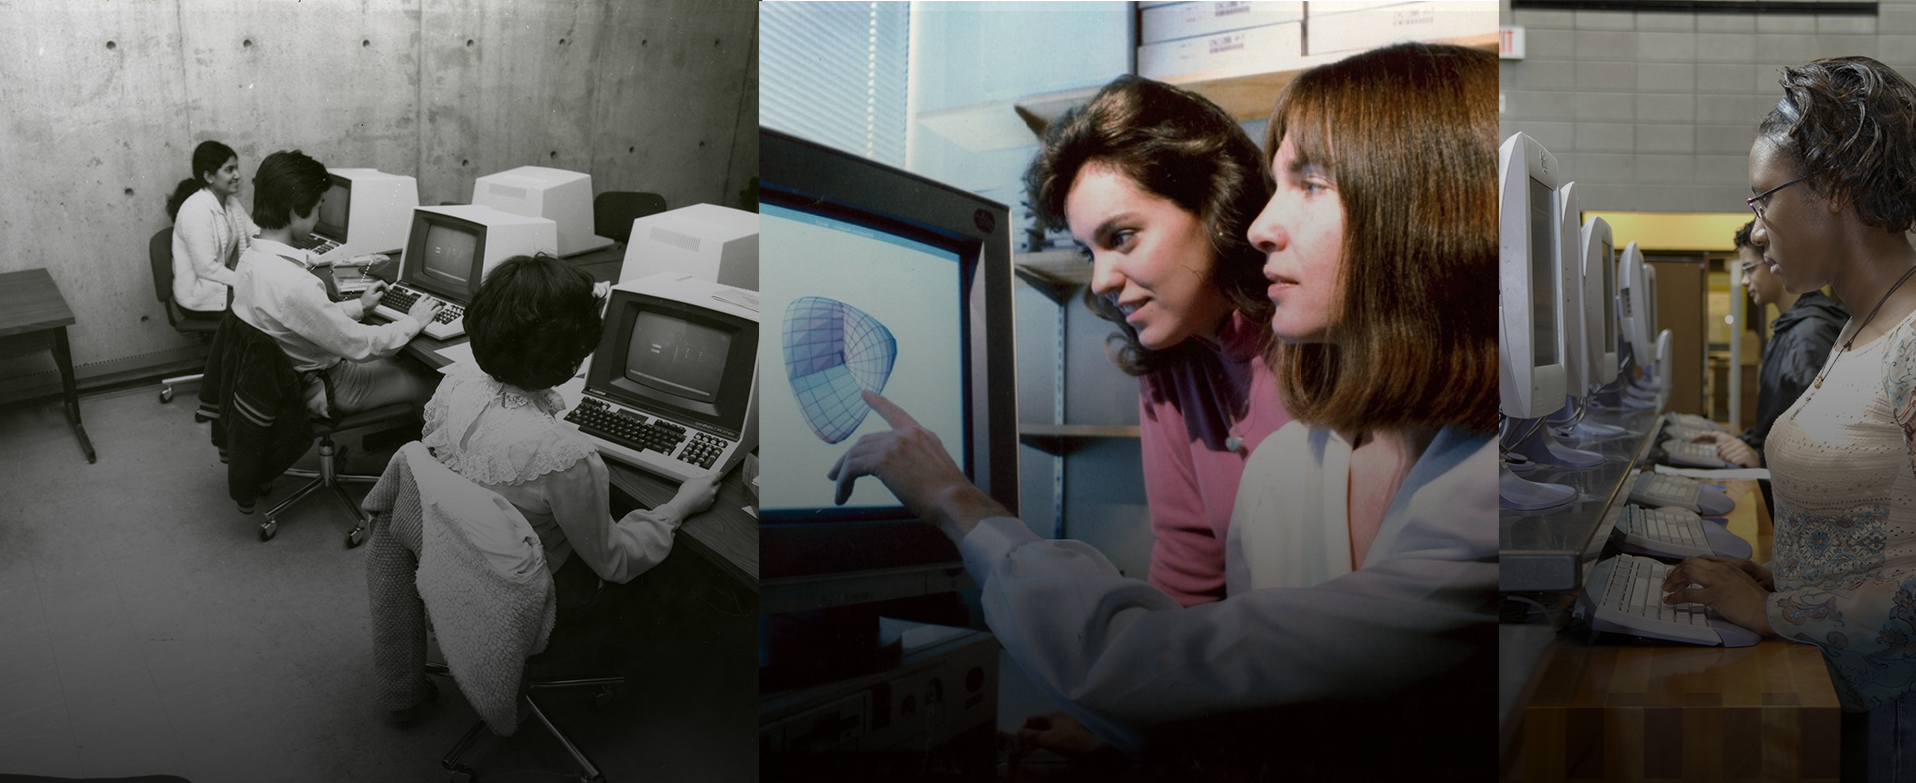 Three images of individuals using computers over history